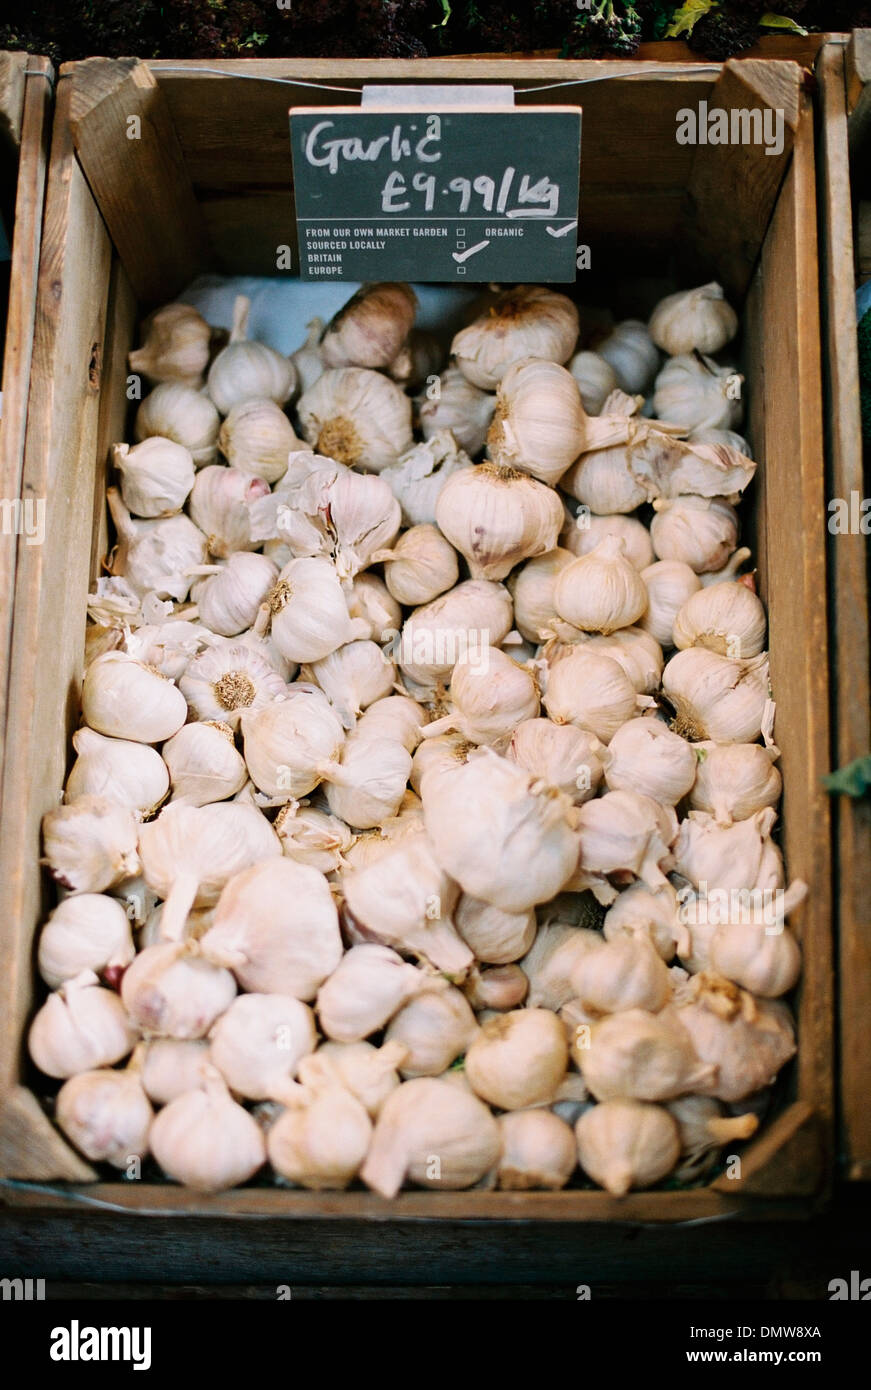 A wooden crate of garlic bulbs. Stock Photo